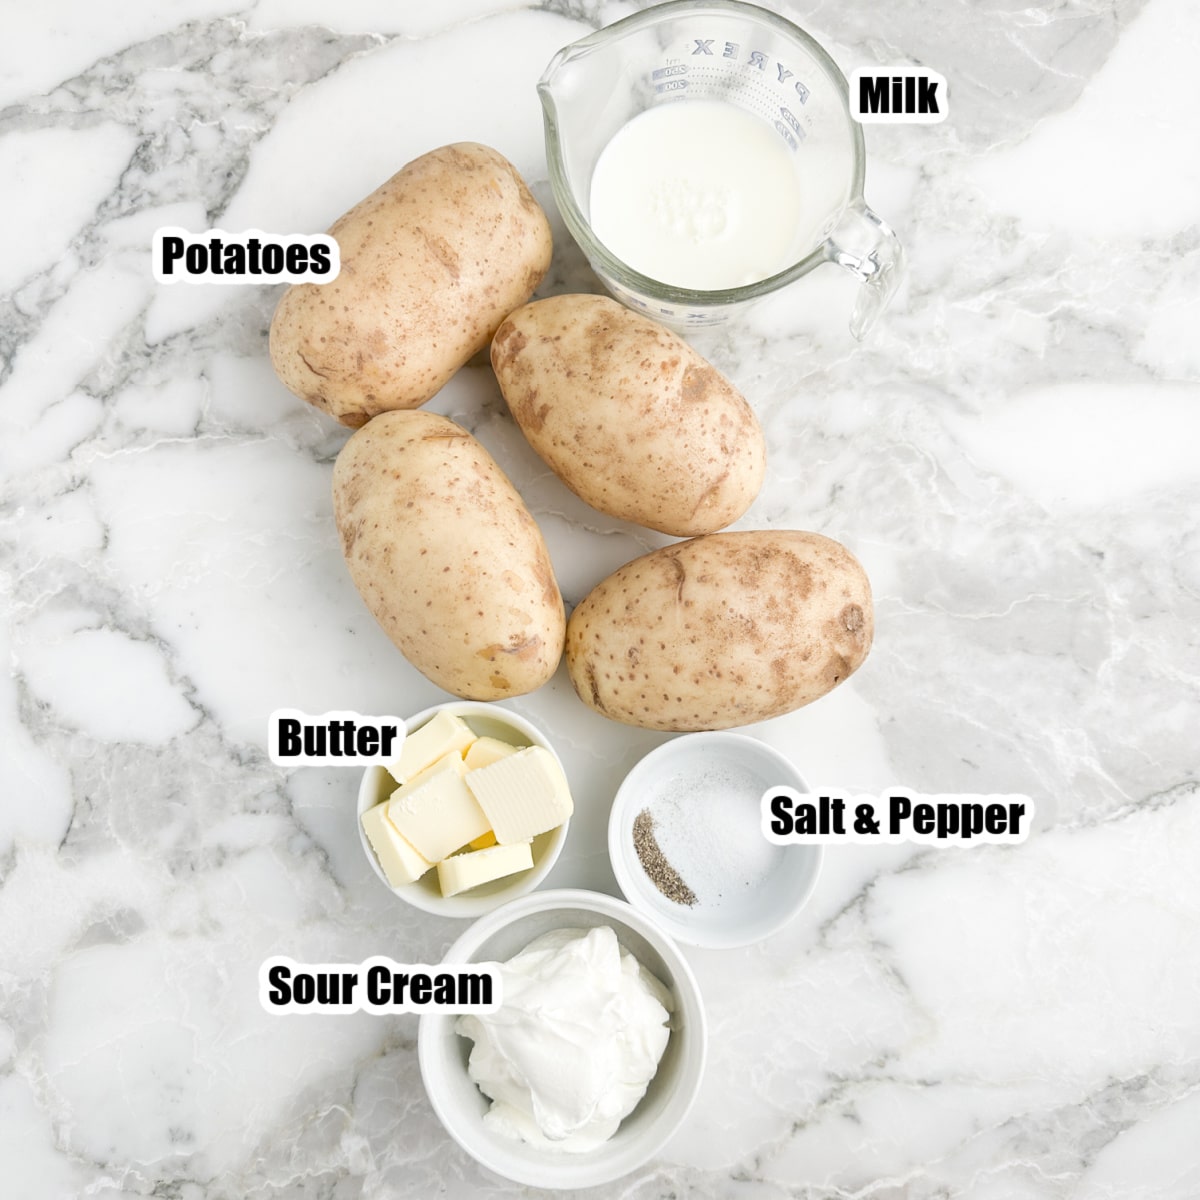 Bowl of milk, potatoes, butter, and sour cream. 